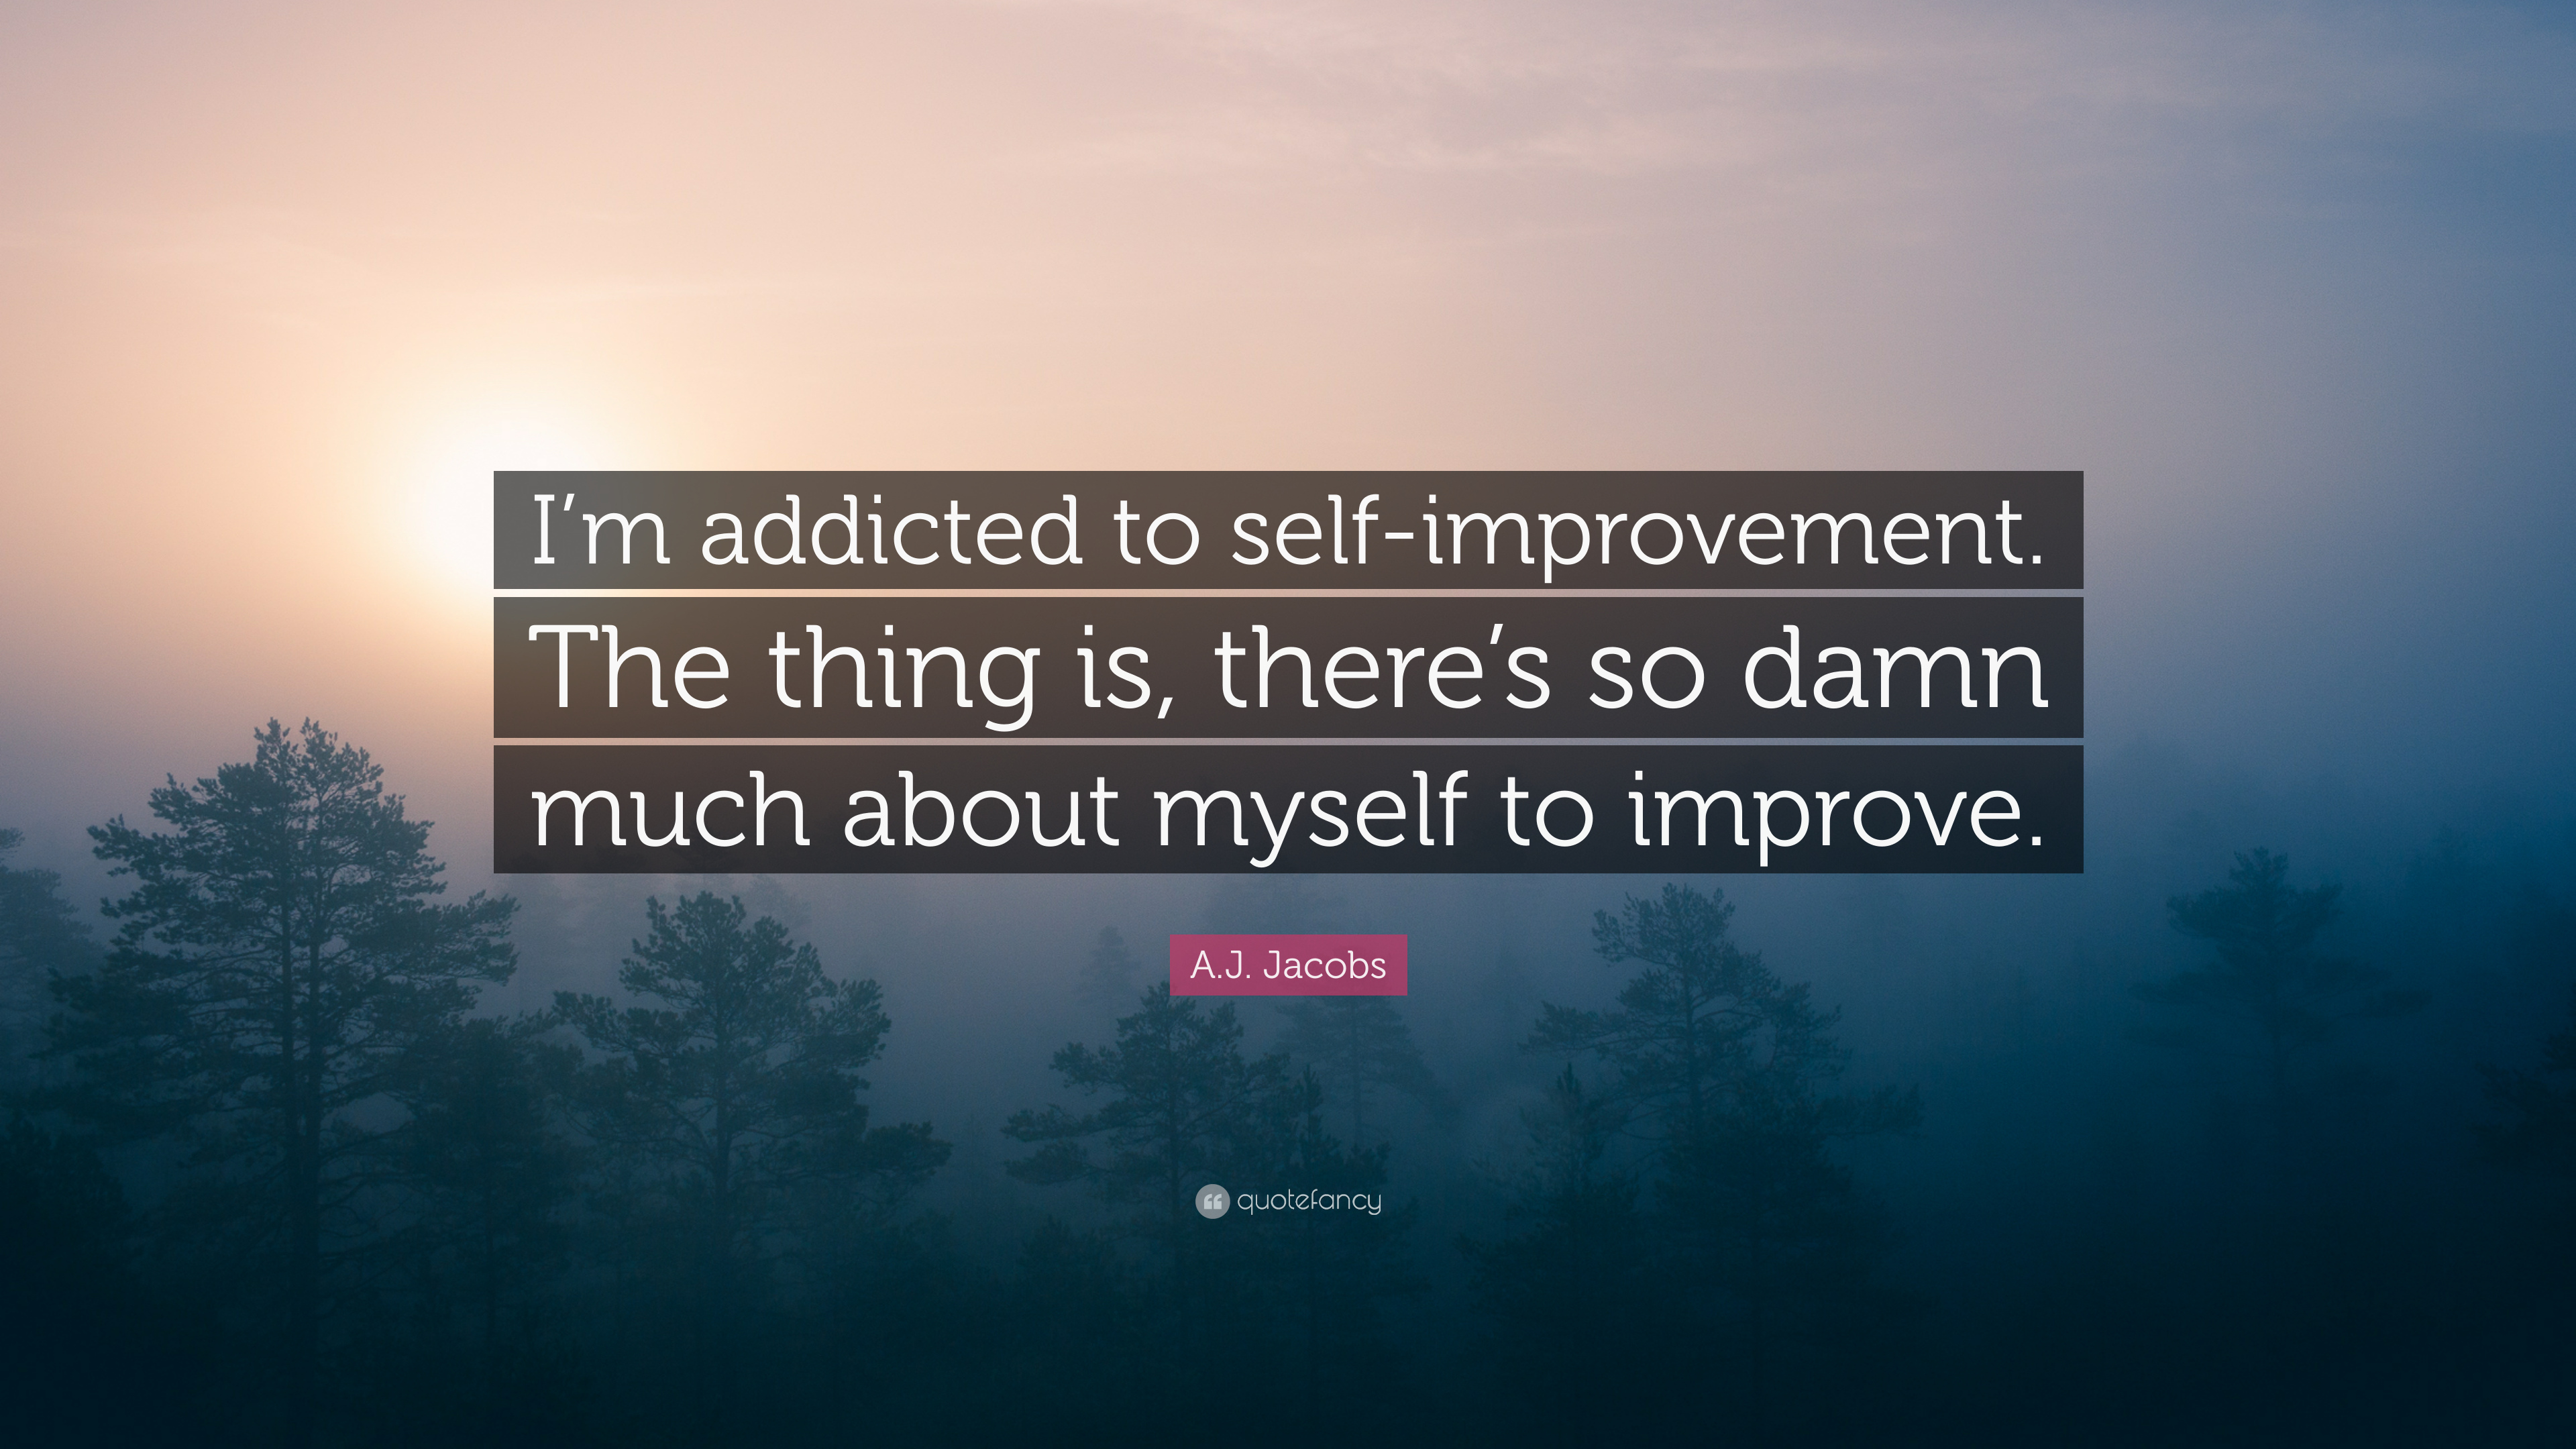 A.J. Jacobs Quote: “I'm Addicted To Self Improvement. The Thing Is, There's So Damn Much